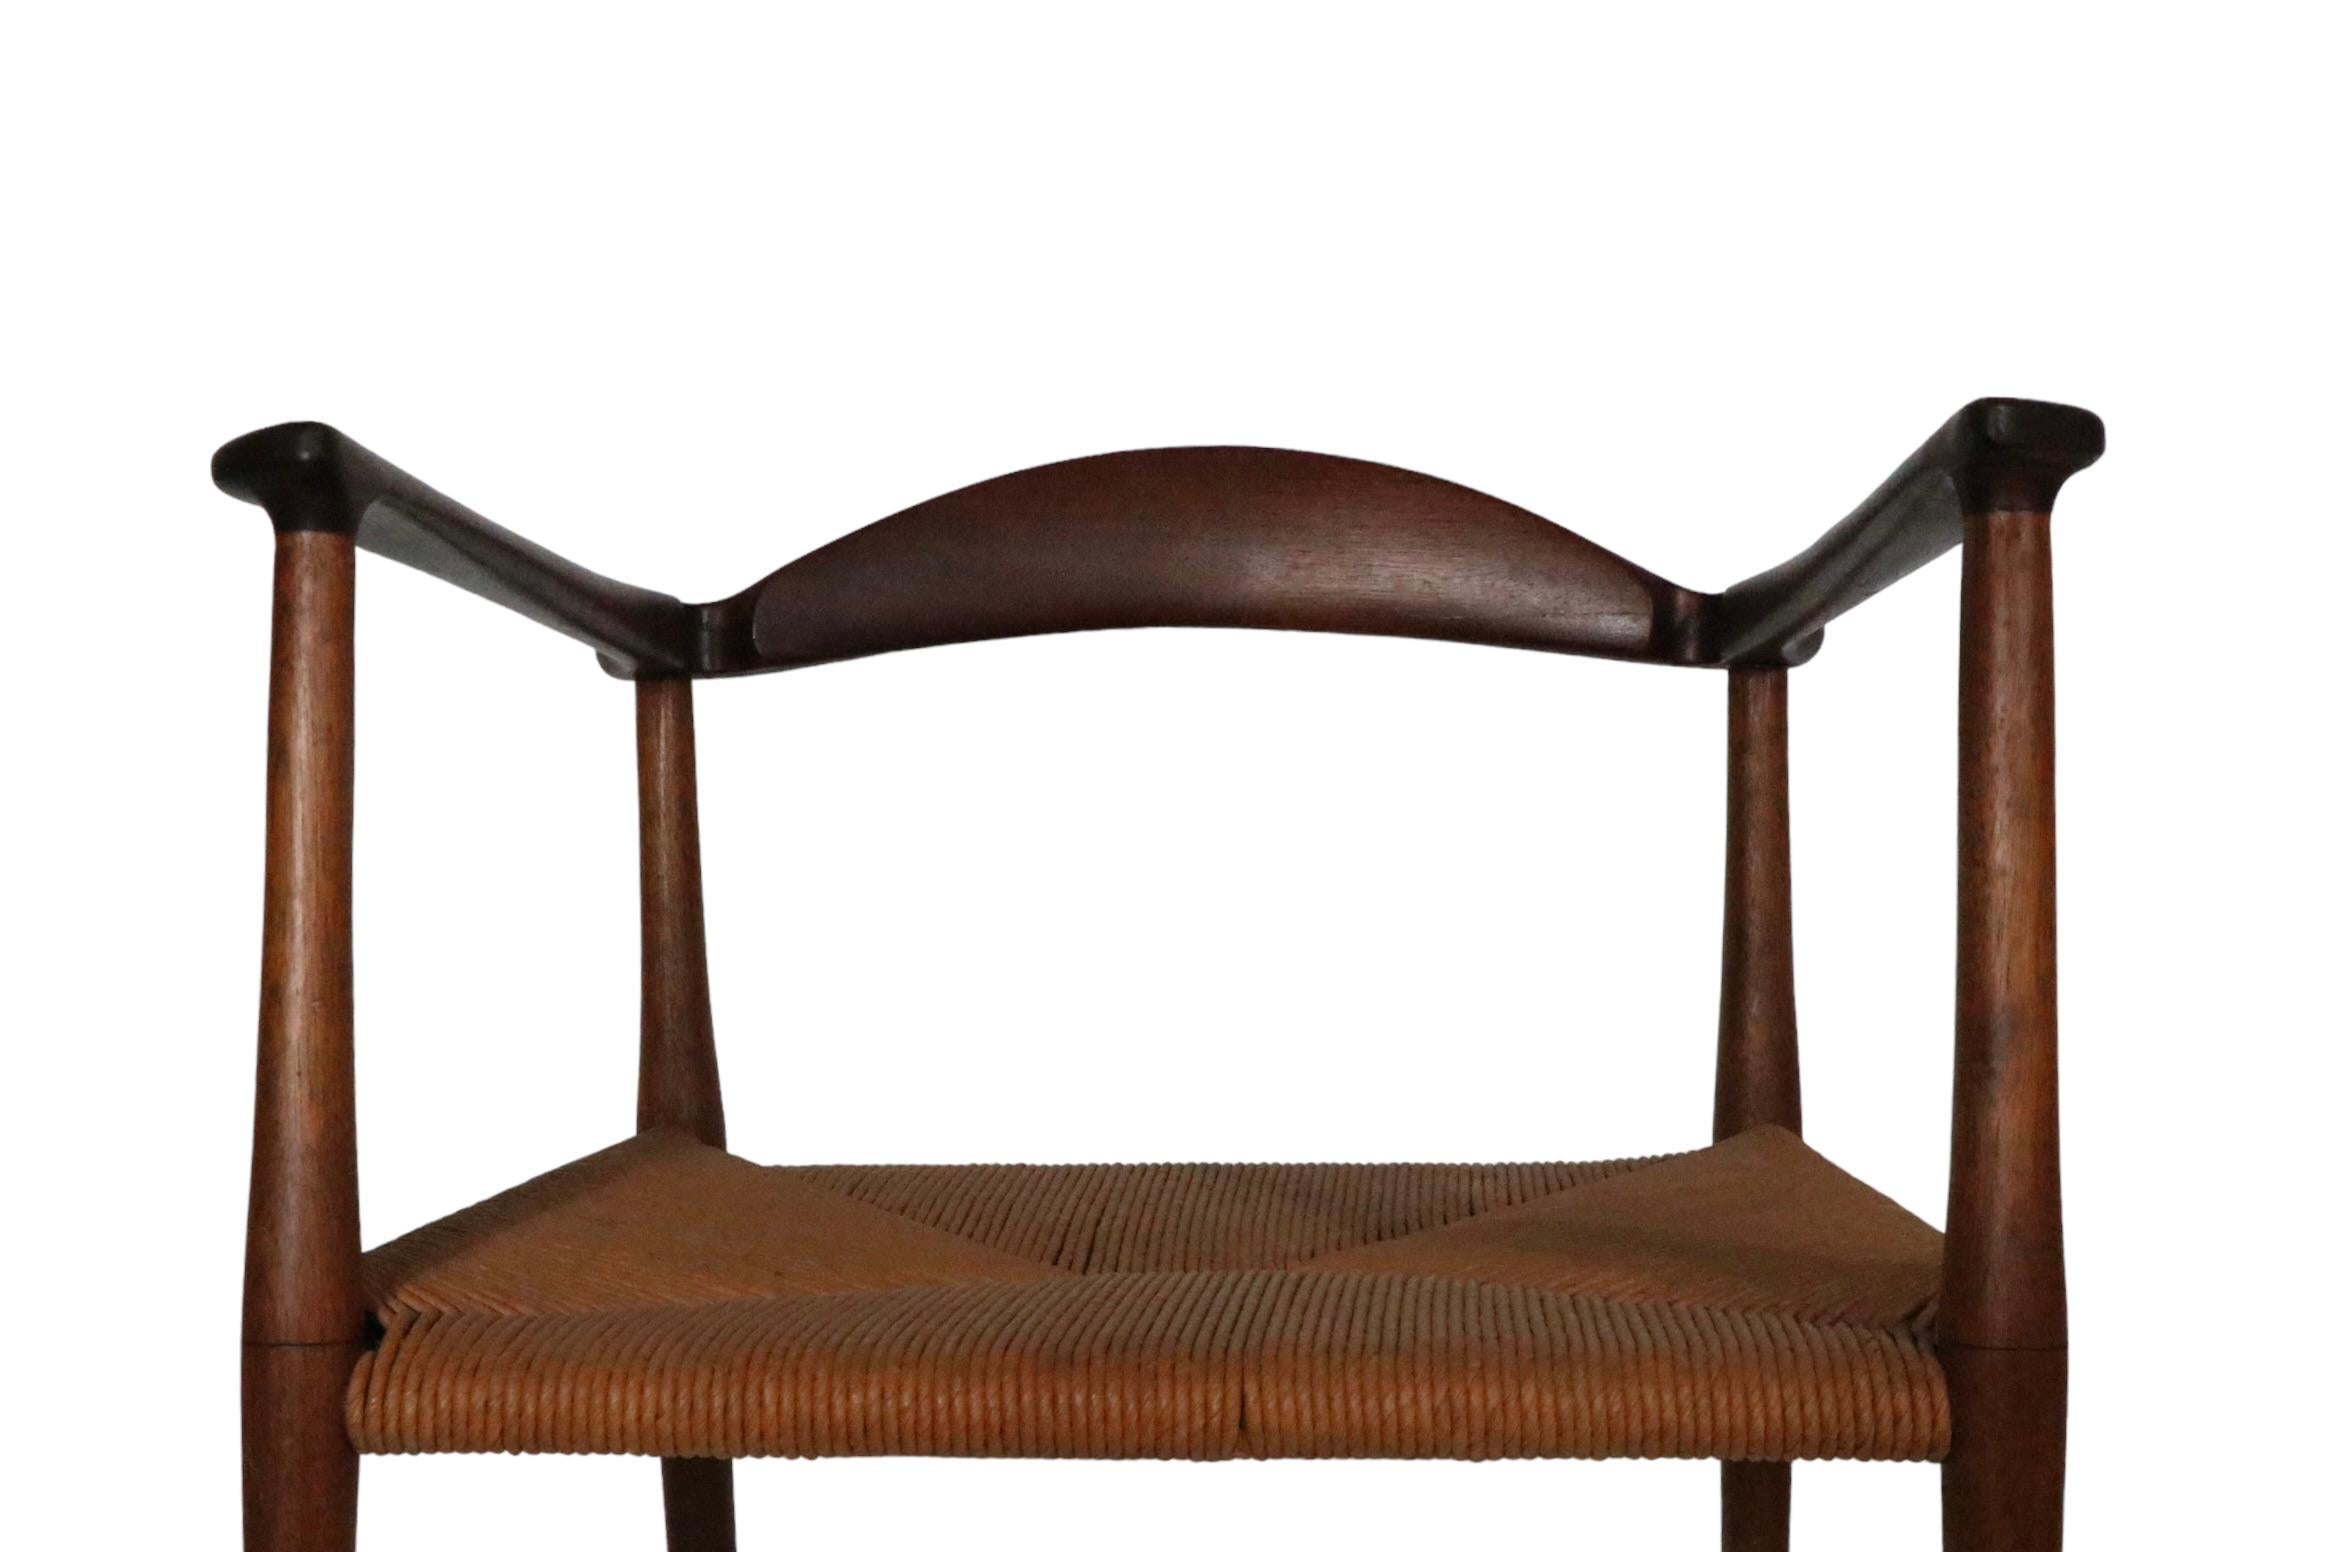 20th Century Mid Century Danish Modern Arm Dining Chair in Walnut with Rope Seat, circa 1950s